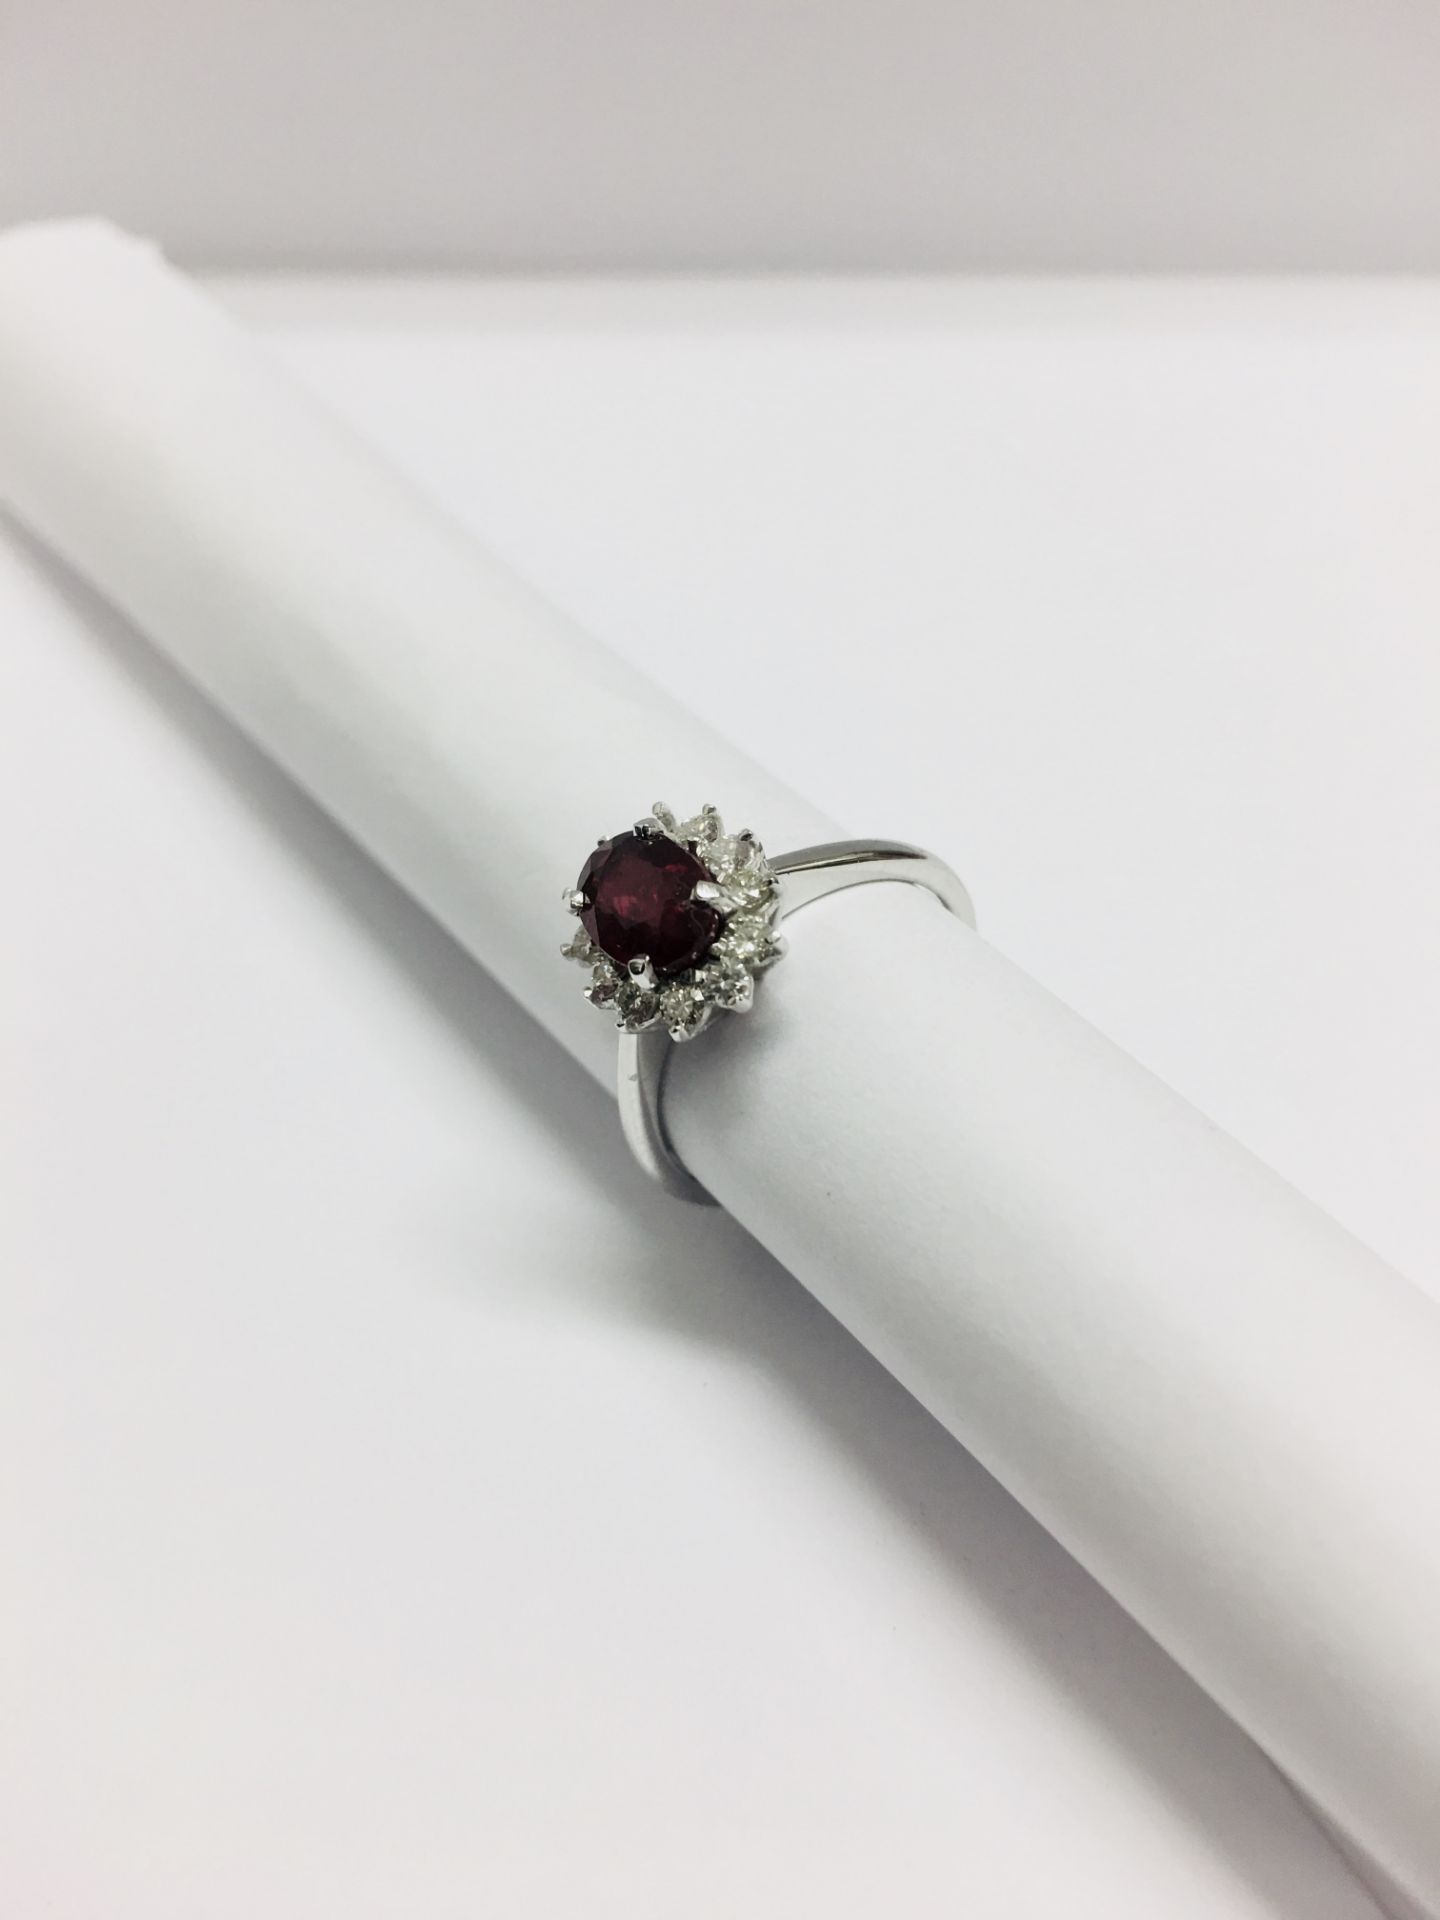 0.80Ct Ruby And Diamond Cluster Ring Set With A Oval Cut(Glass Filled) Ruby - Image 5 of 5